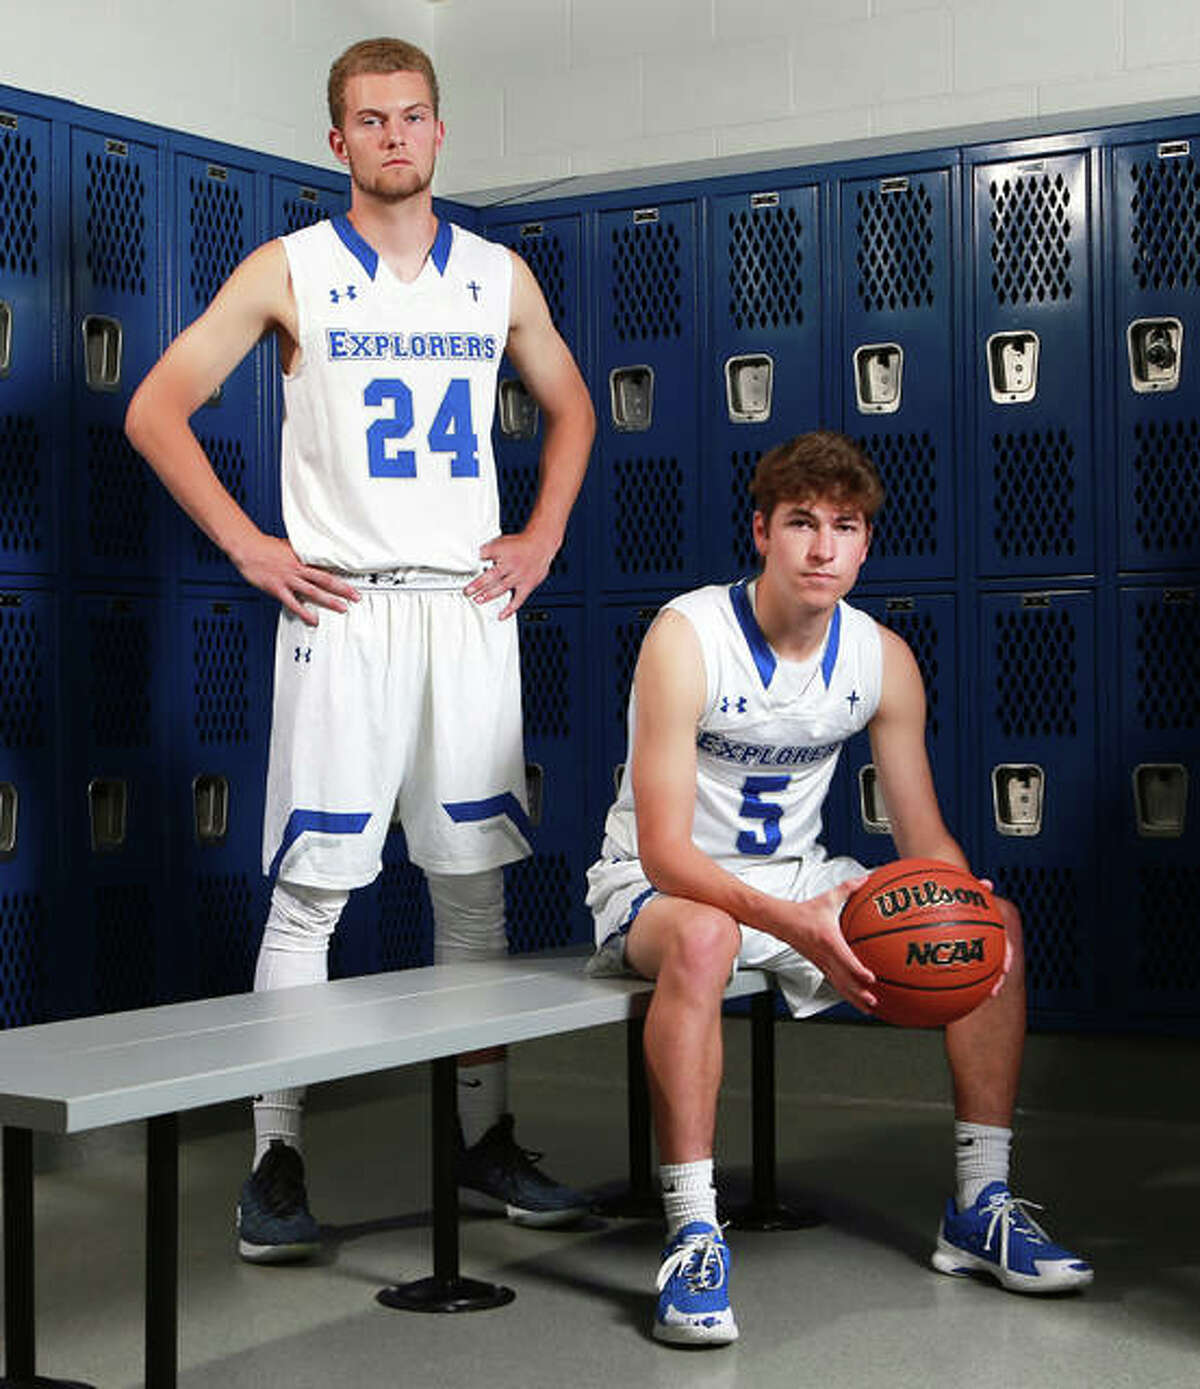 Marquette Catholic’s Nick Hemann (left) and Chris Hartrich are the 2018-19 Telegraph Small-Schools Boys Basketball Players of the Year. Both averaged 11 points a game as a senior to lead the Explorers to a 30-4 season.